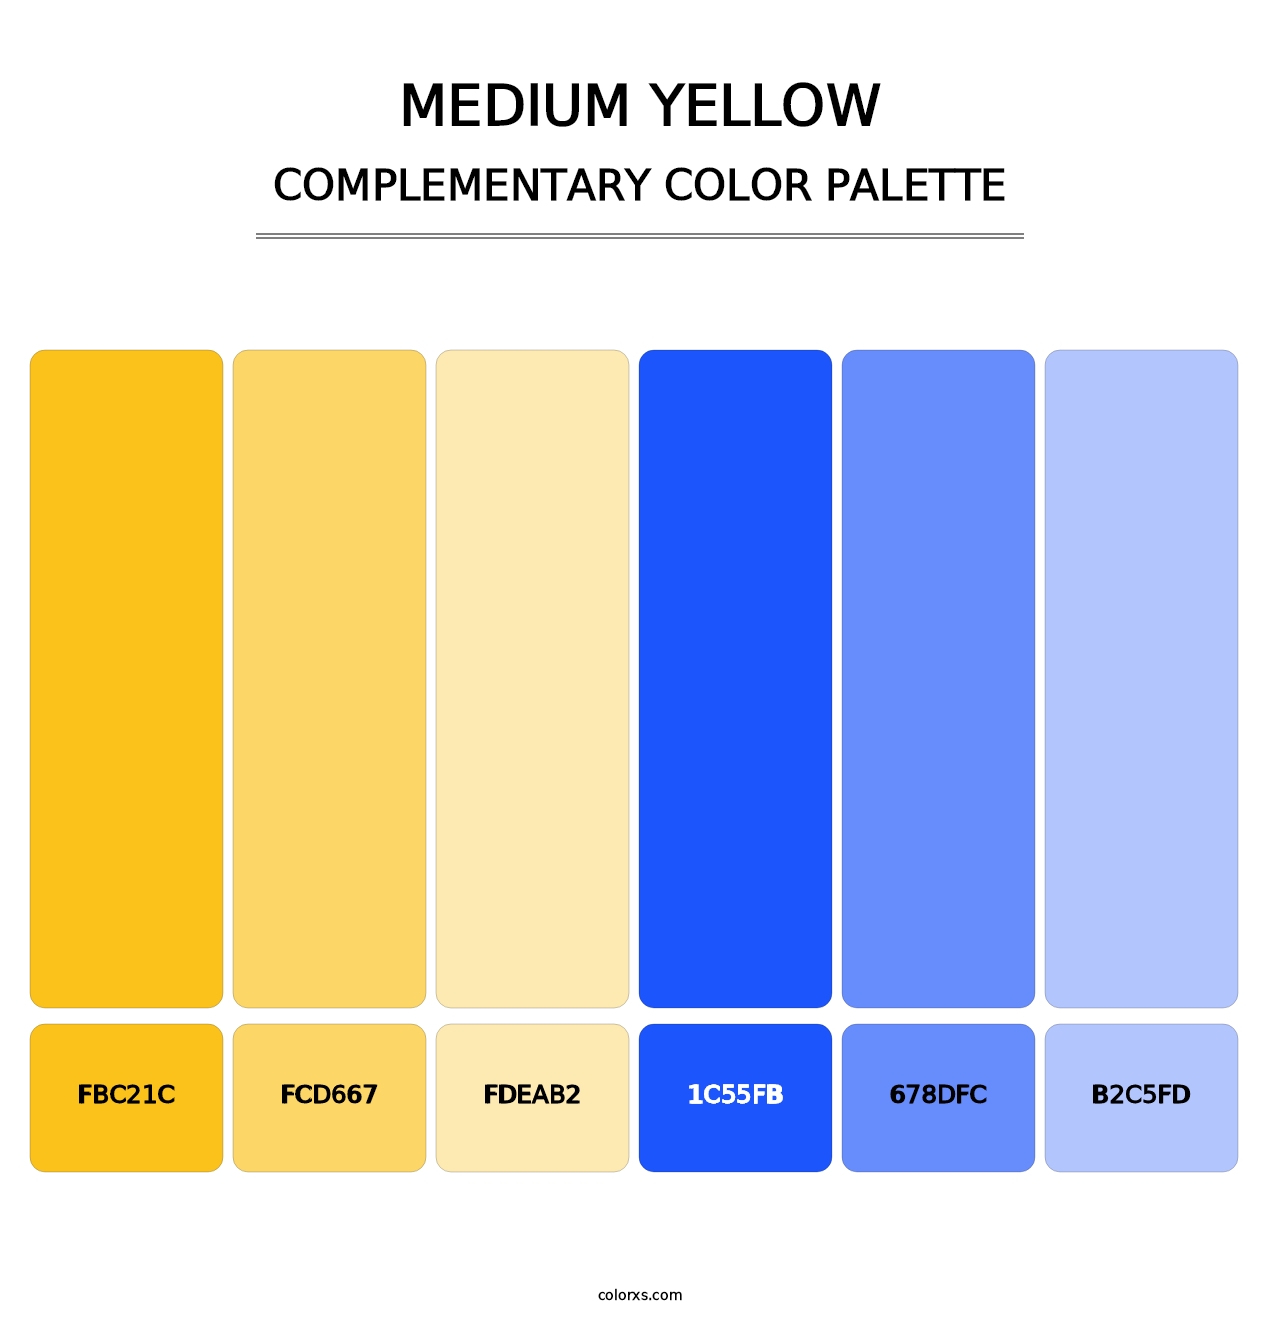 Medium Yellow - Complementary Color Palette